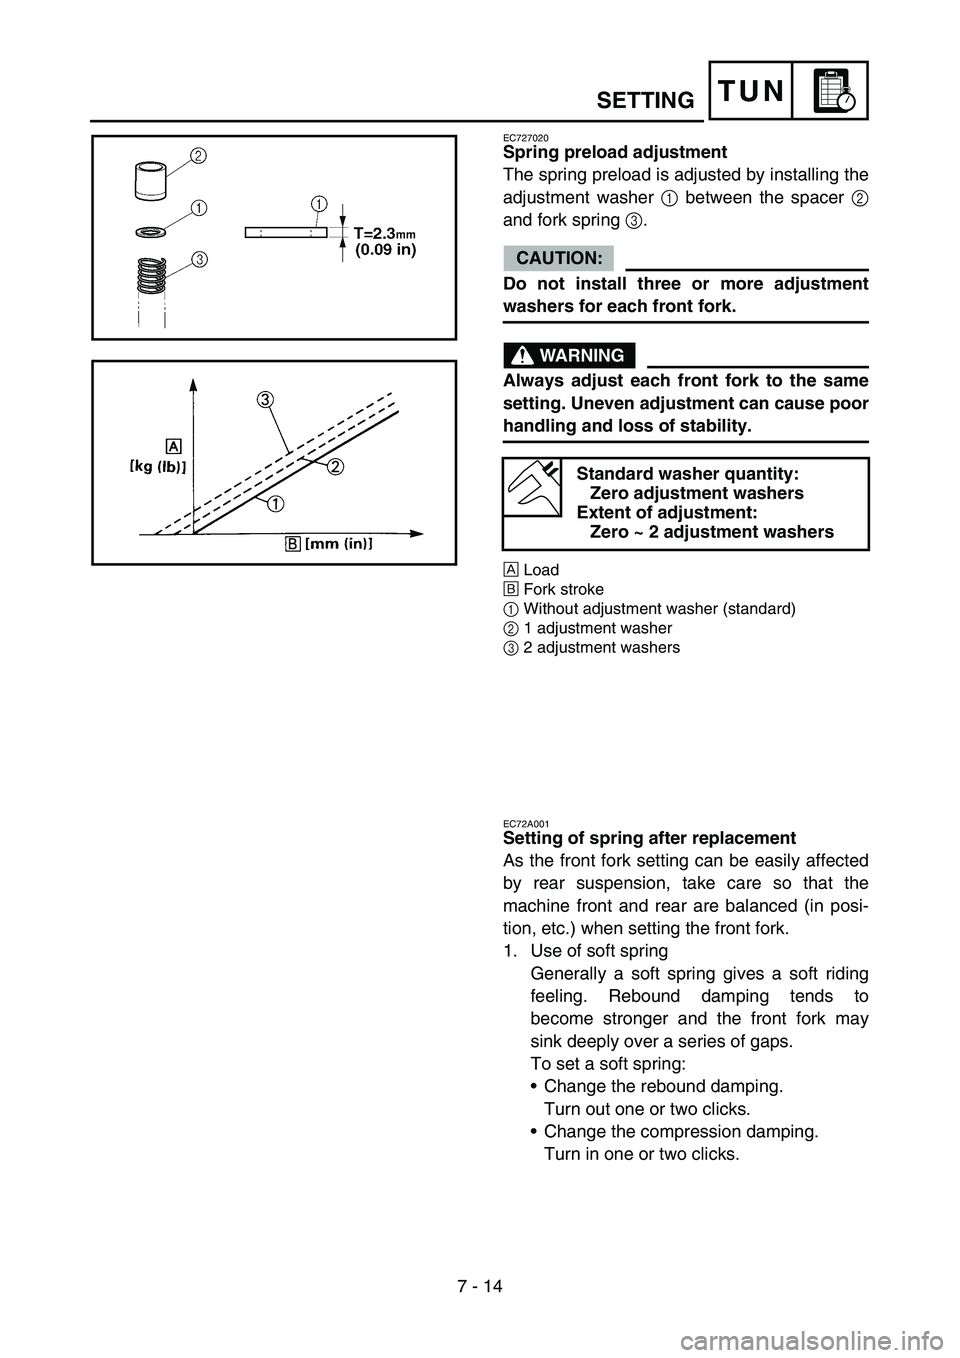 YAMAHA YZ450F 2005  Owners Manual 7 - 14
TUNSETTING
EC727020
Spring preload adjustment
The spring preload is adjusted by installing the
adjustment washer 1 between the spacer 2
and fork spring 3.
CAUTION:
Do not install three or more 